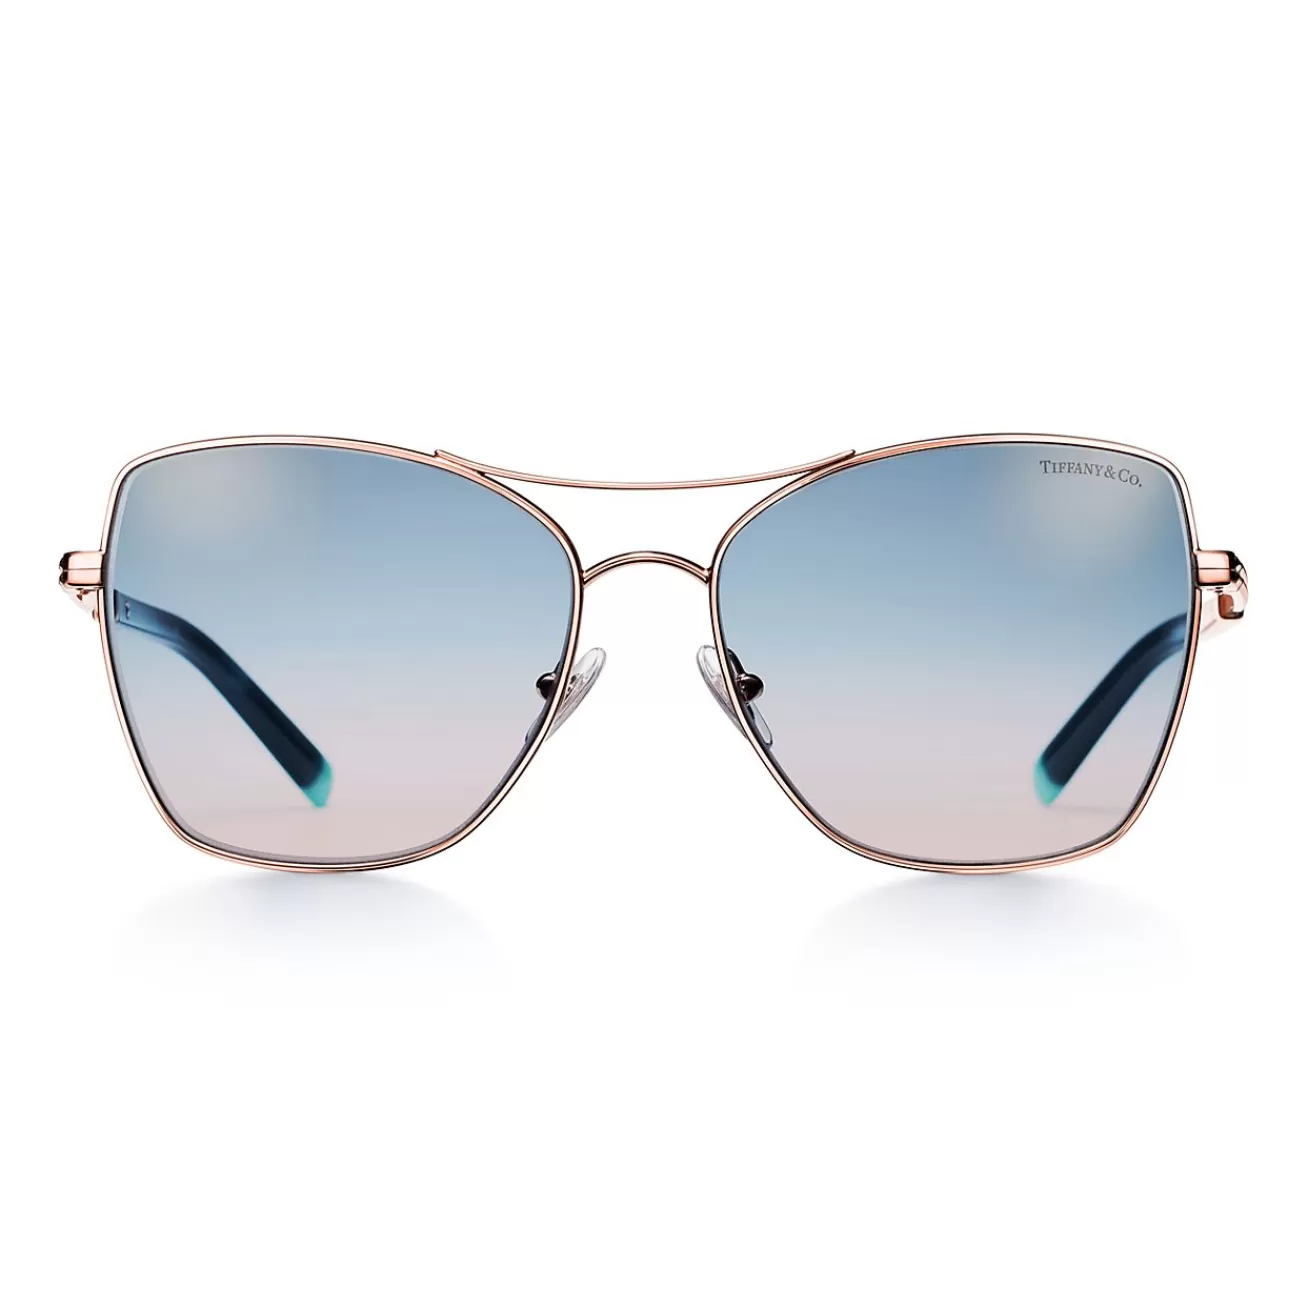 Tiffany & Co. Diamond Point Sunglasses in Rose Gold-colored Metal with Brown and Blue Lenses | ^ Sunglasses